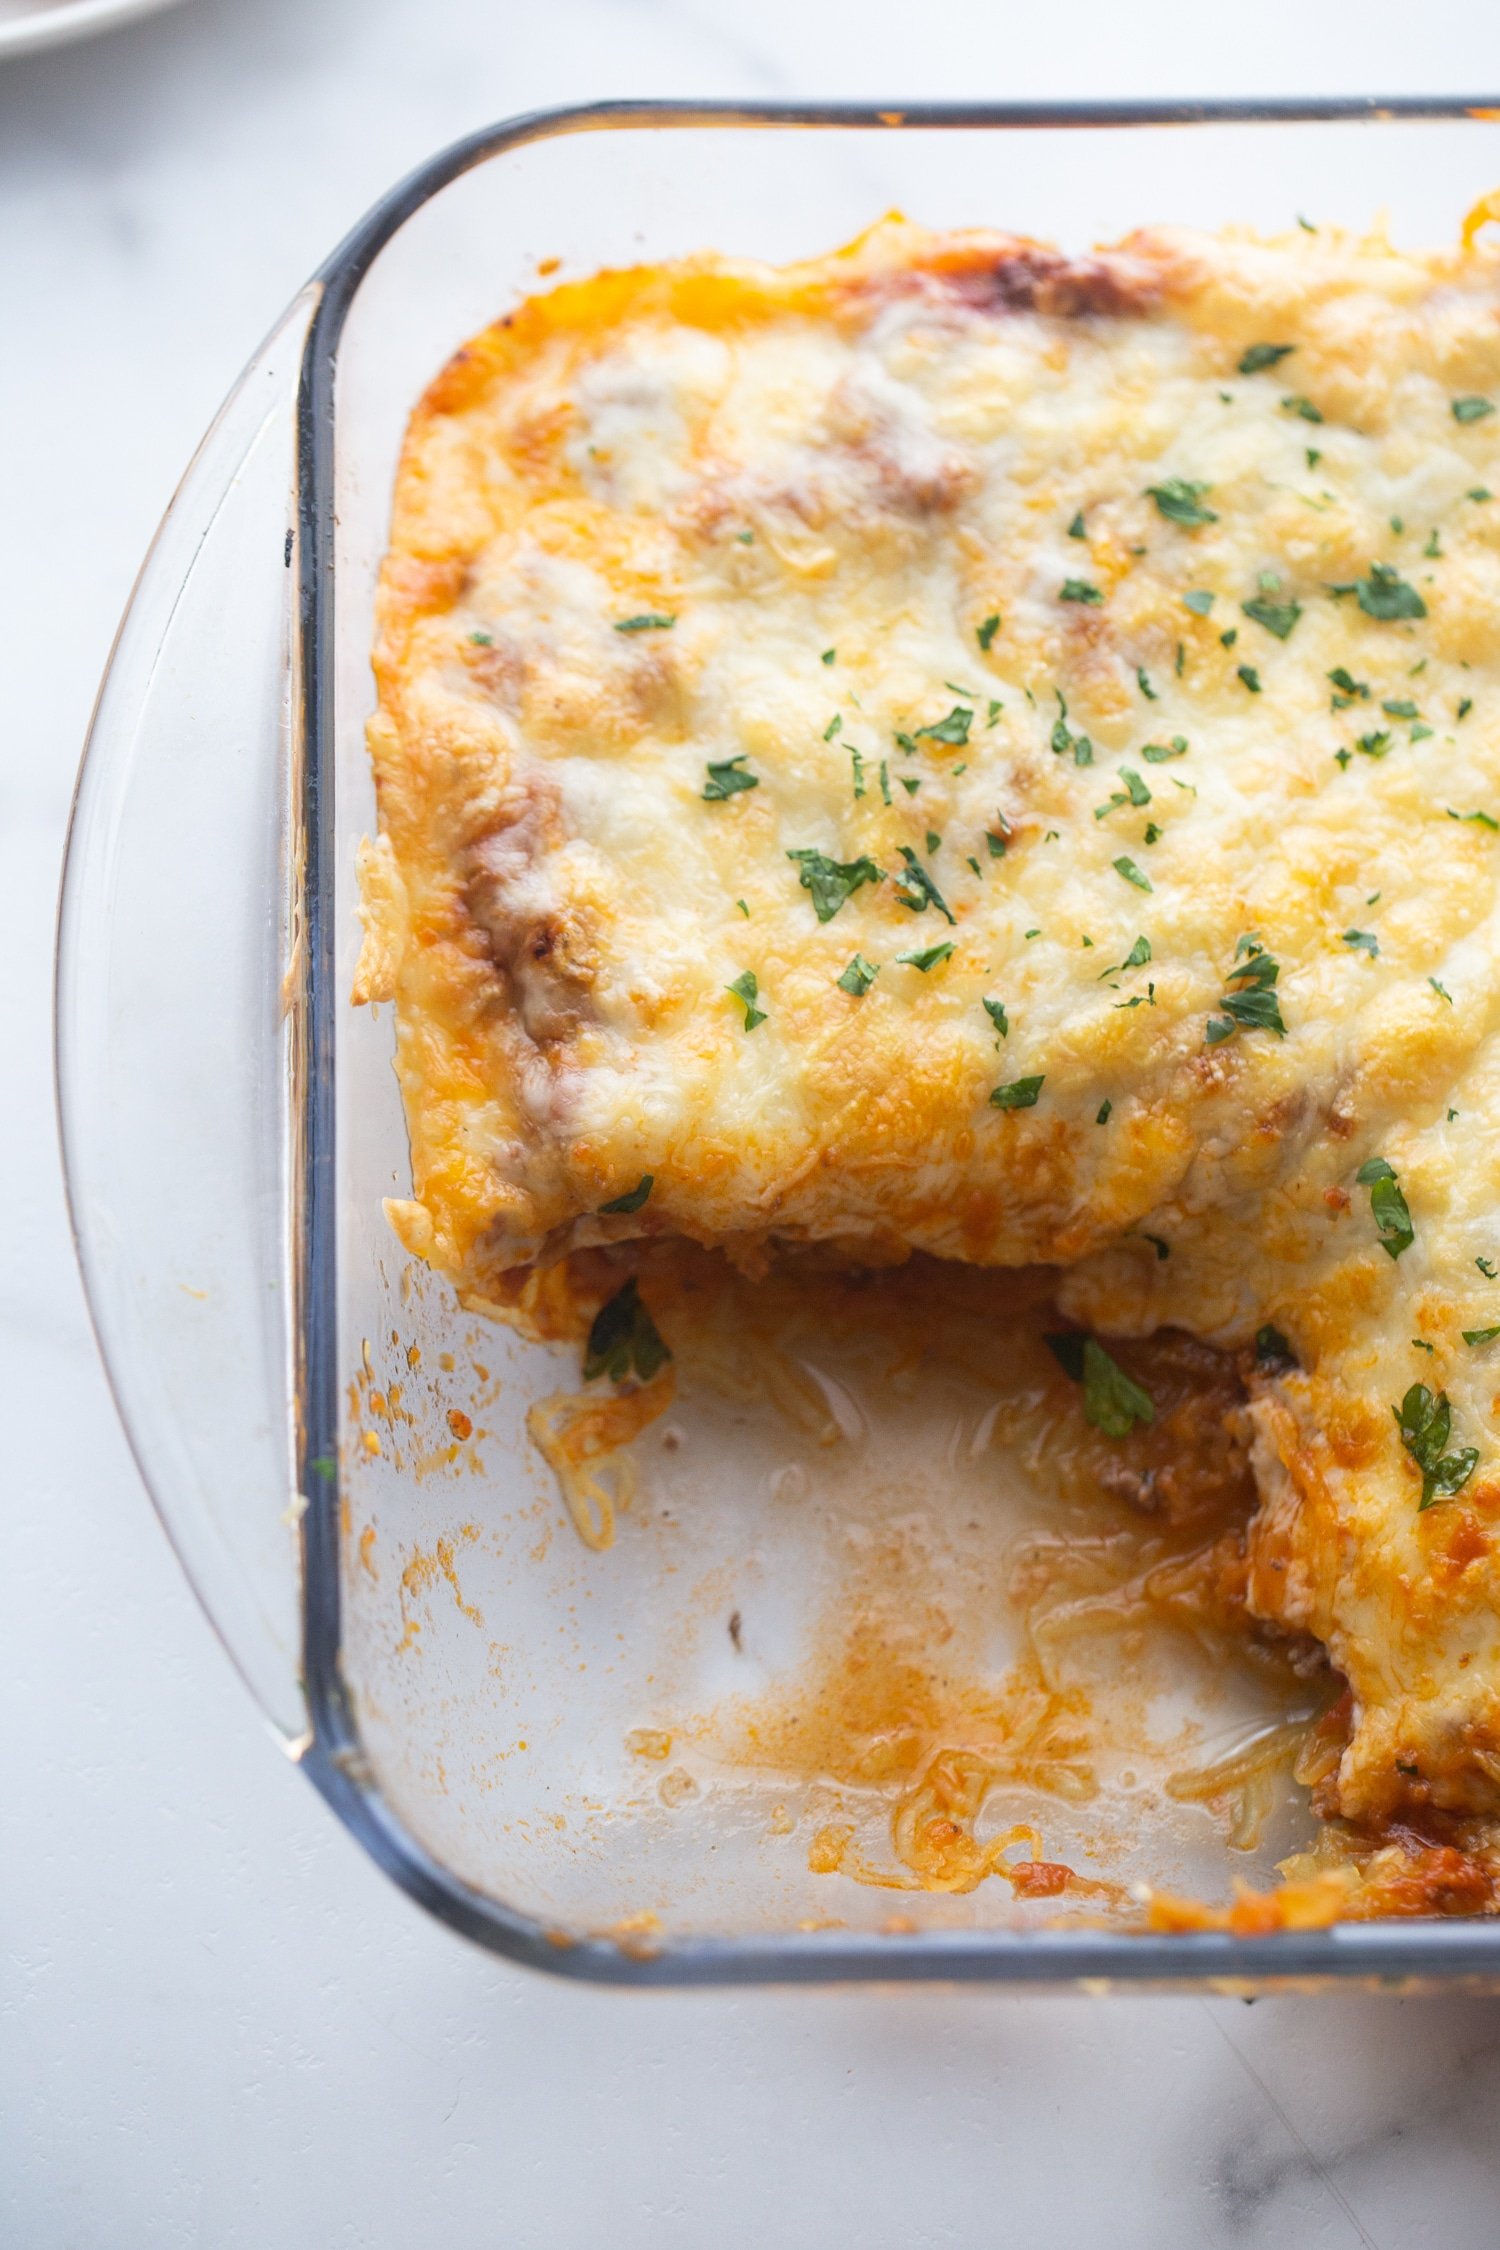 low carb baked italian casserole in a glass baking dish with a piece cut out